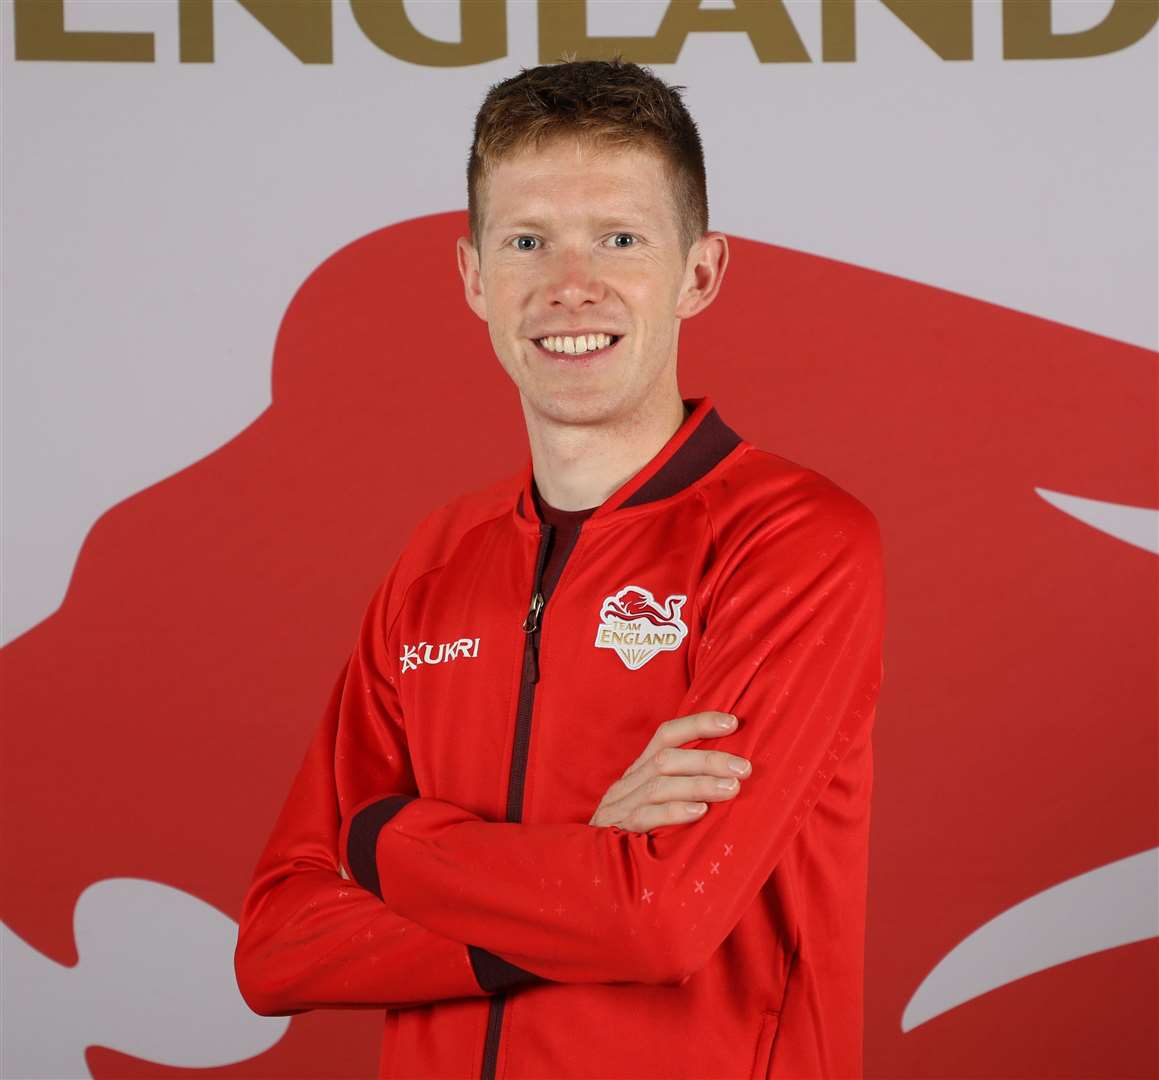 Tonbridge AC's Tom Bosworth wants to end his career while he can still mix it with the frontrunners. Picture: Team England